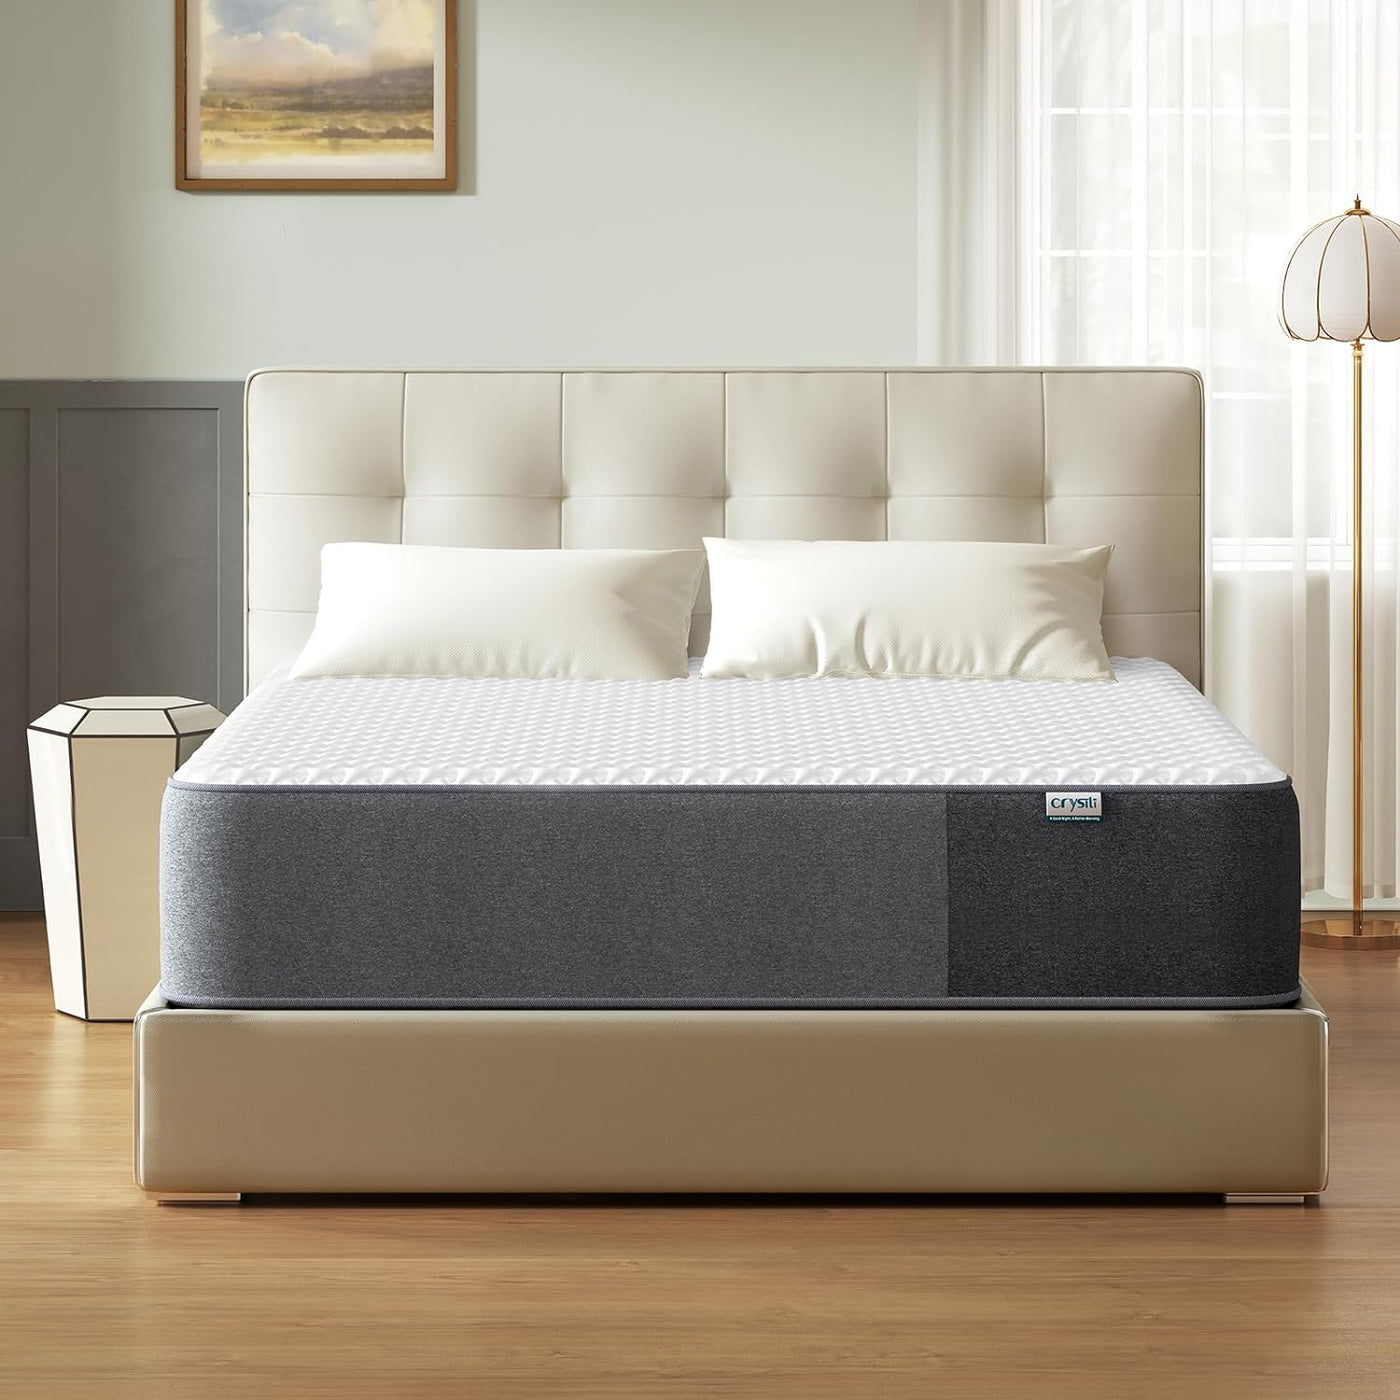 WM Crystli DC Collection| 8 inch Memory Foam Mattress with CertiPUR-US Certified (US)